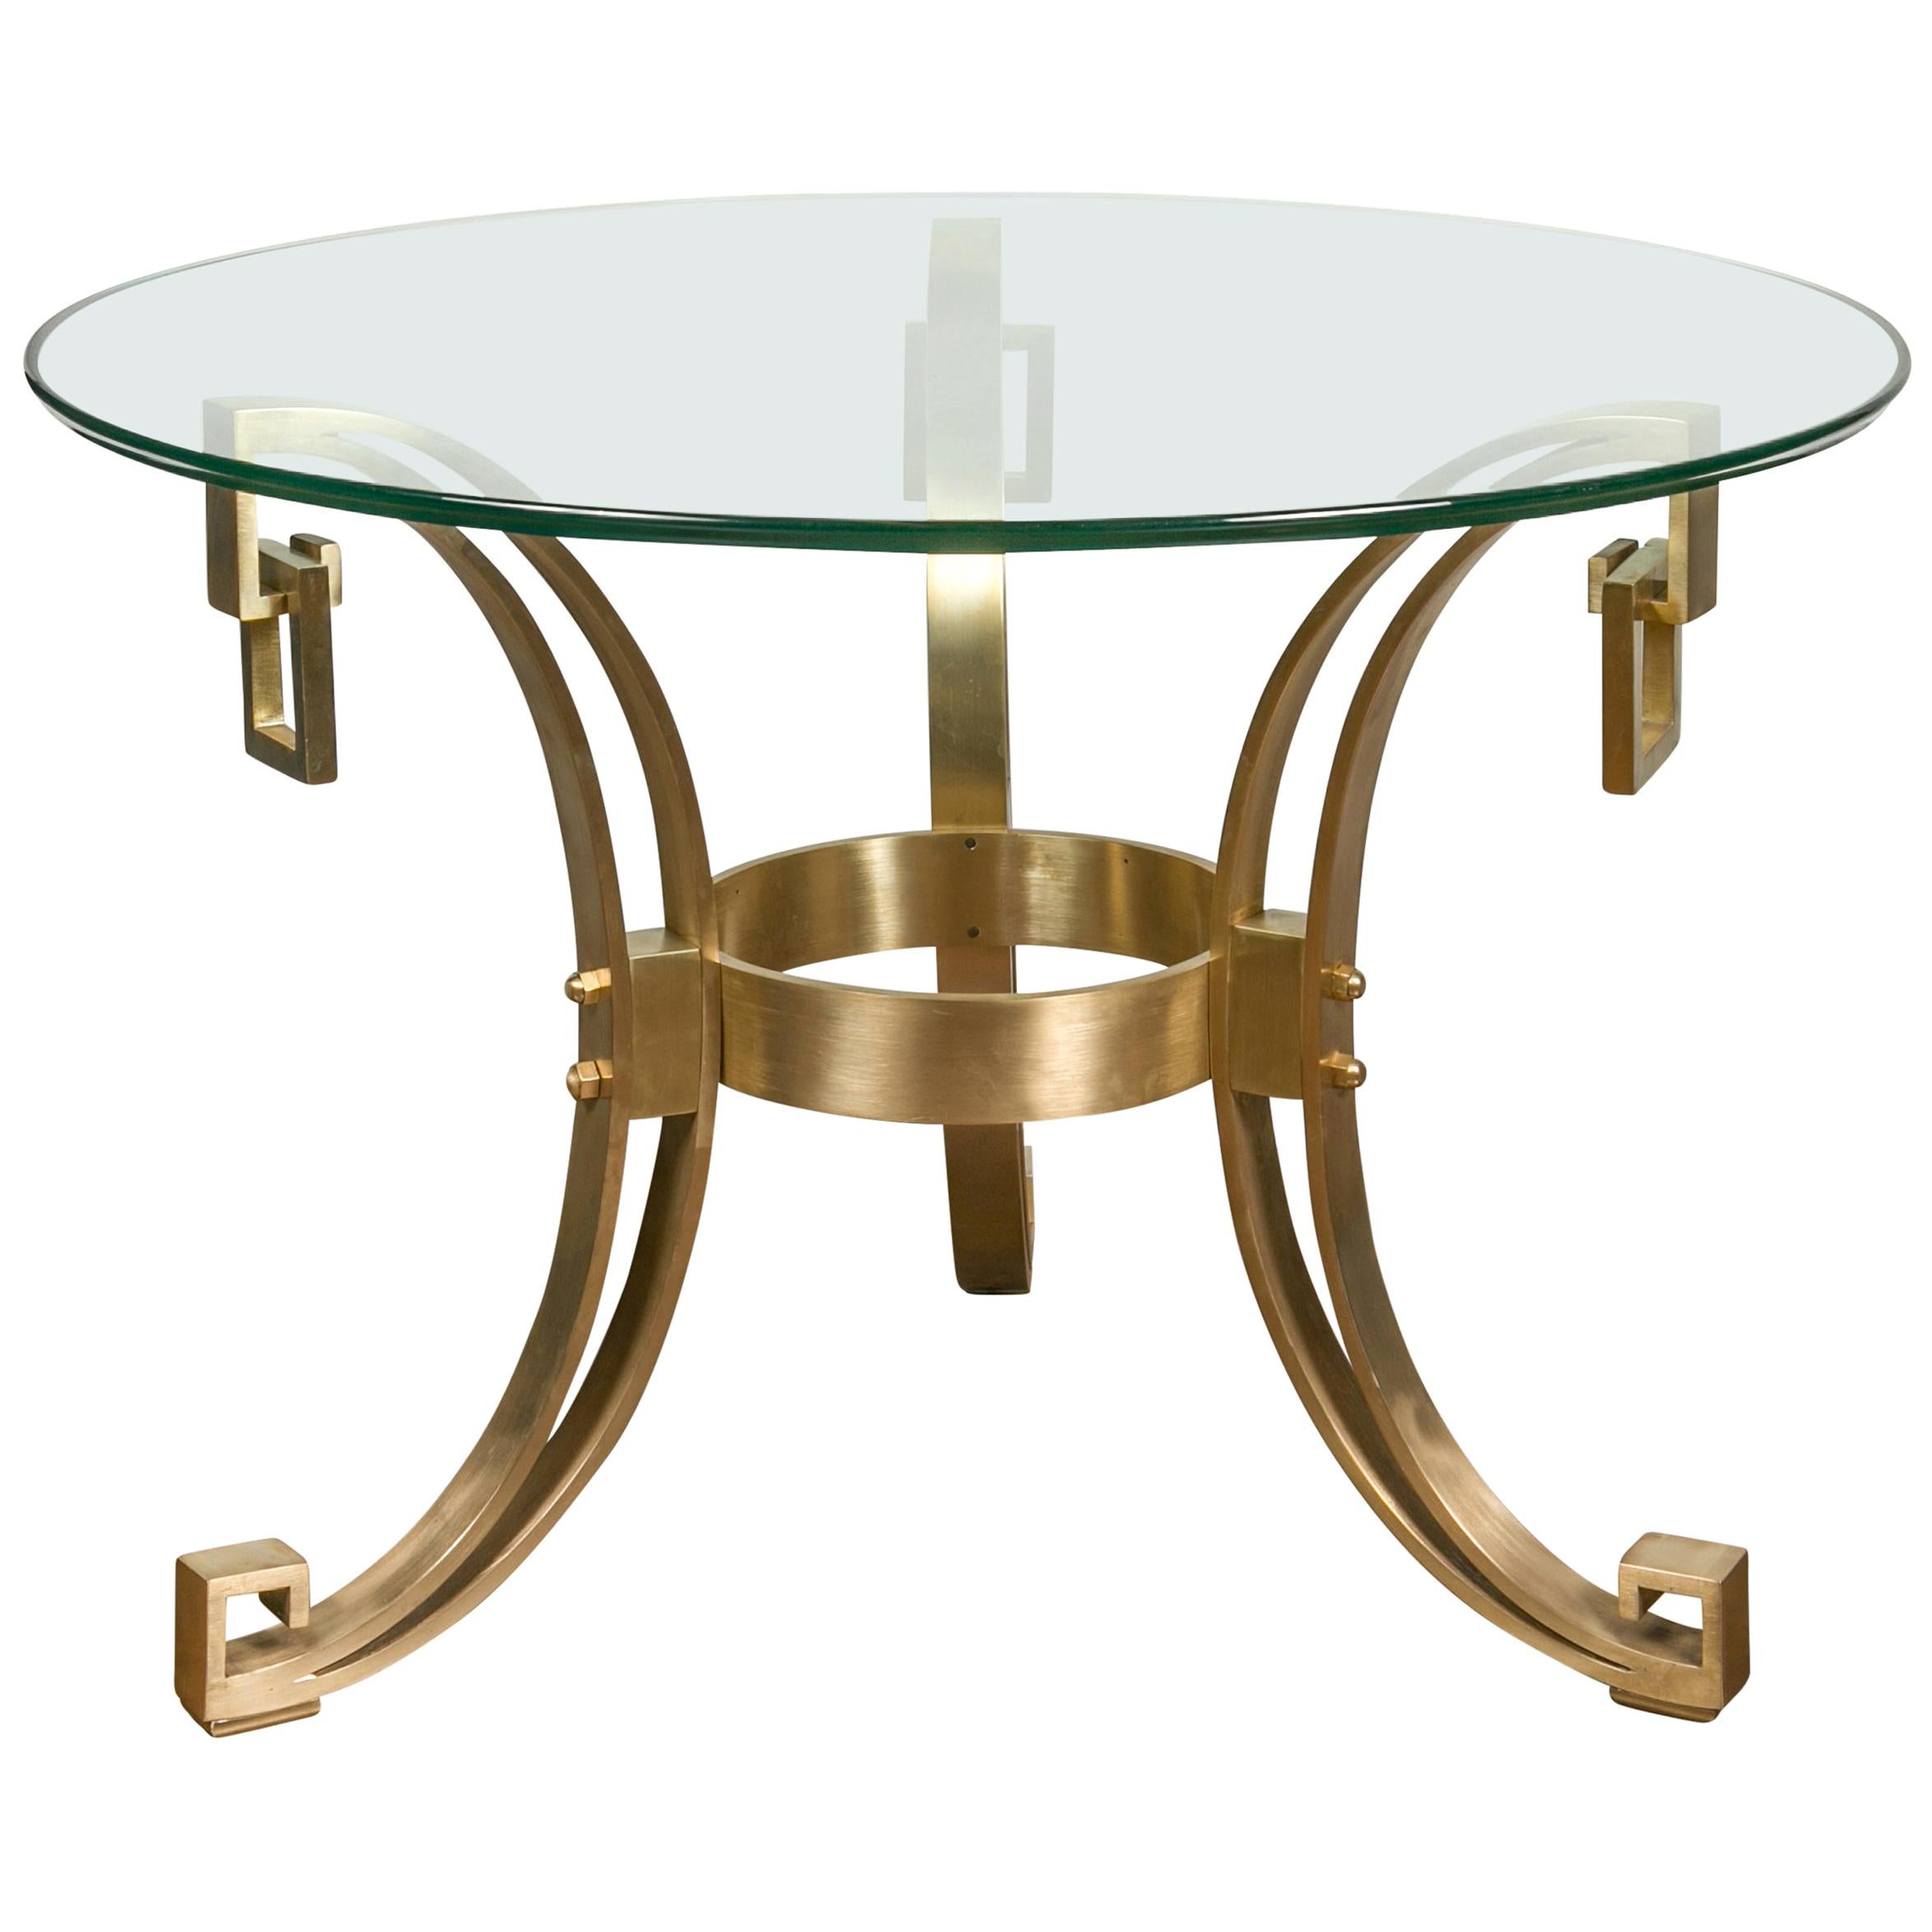 Italian Midcentury Art Deco Style Bronze Center Table with Glass Top